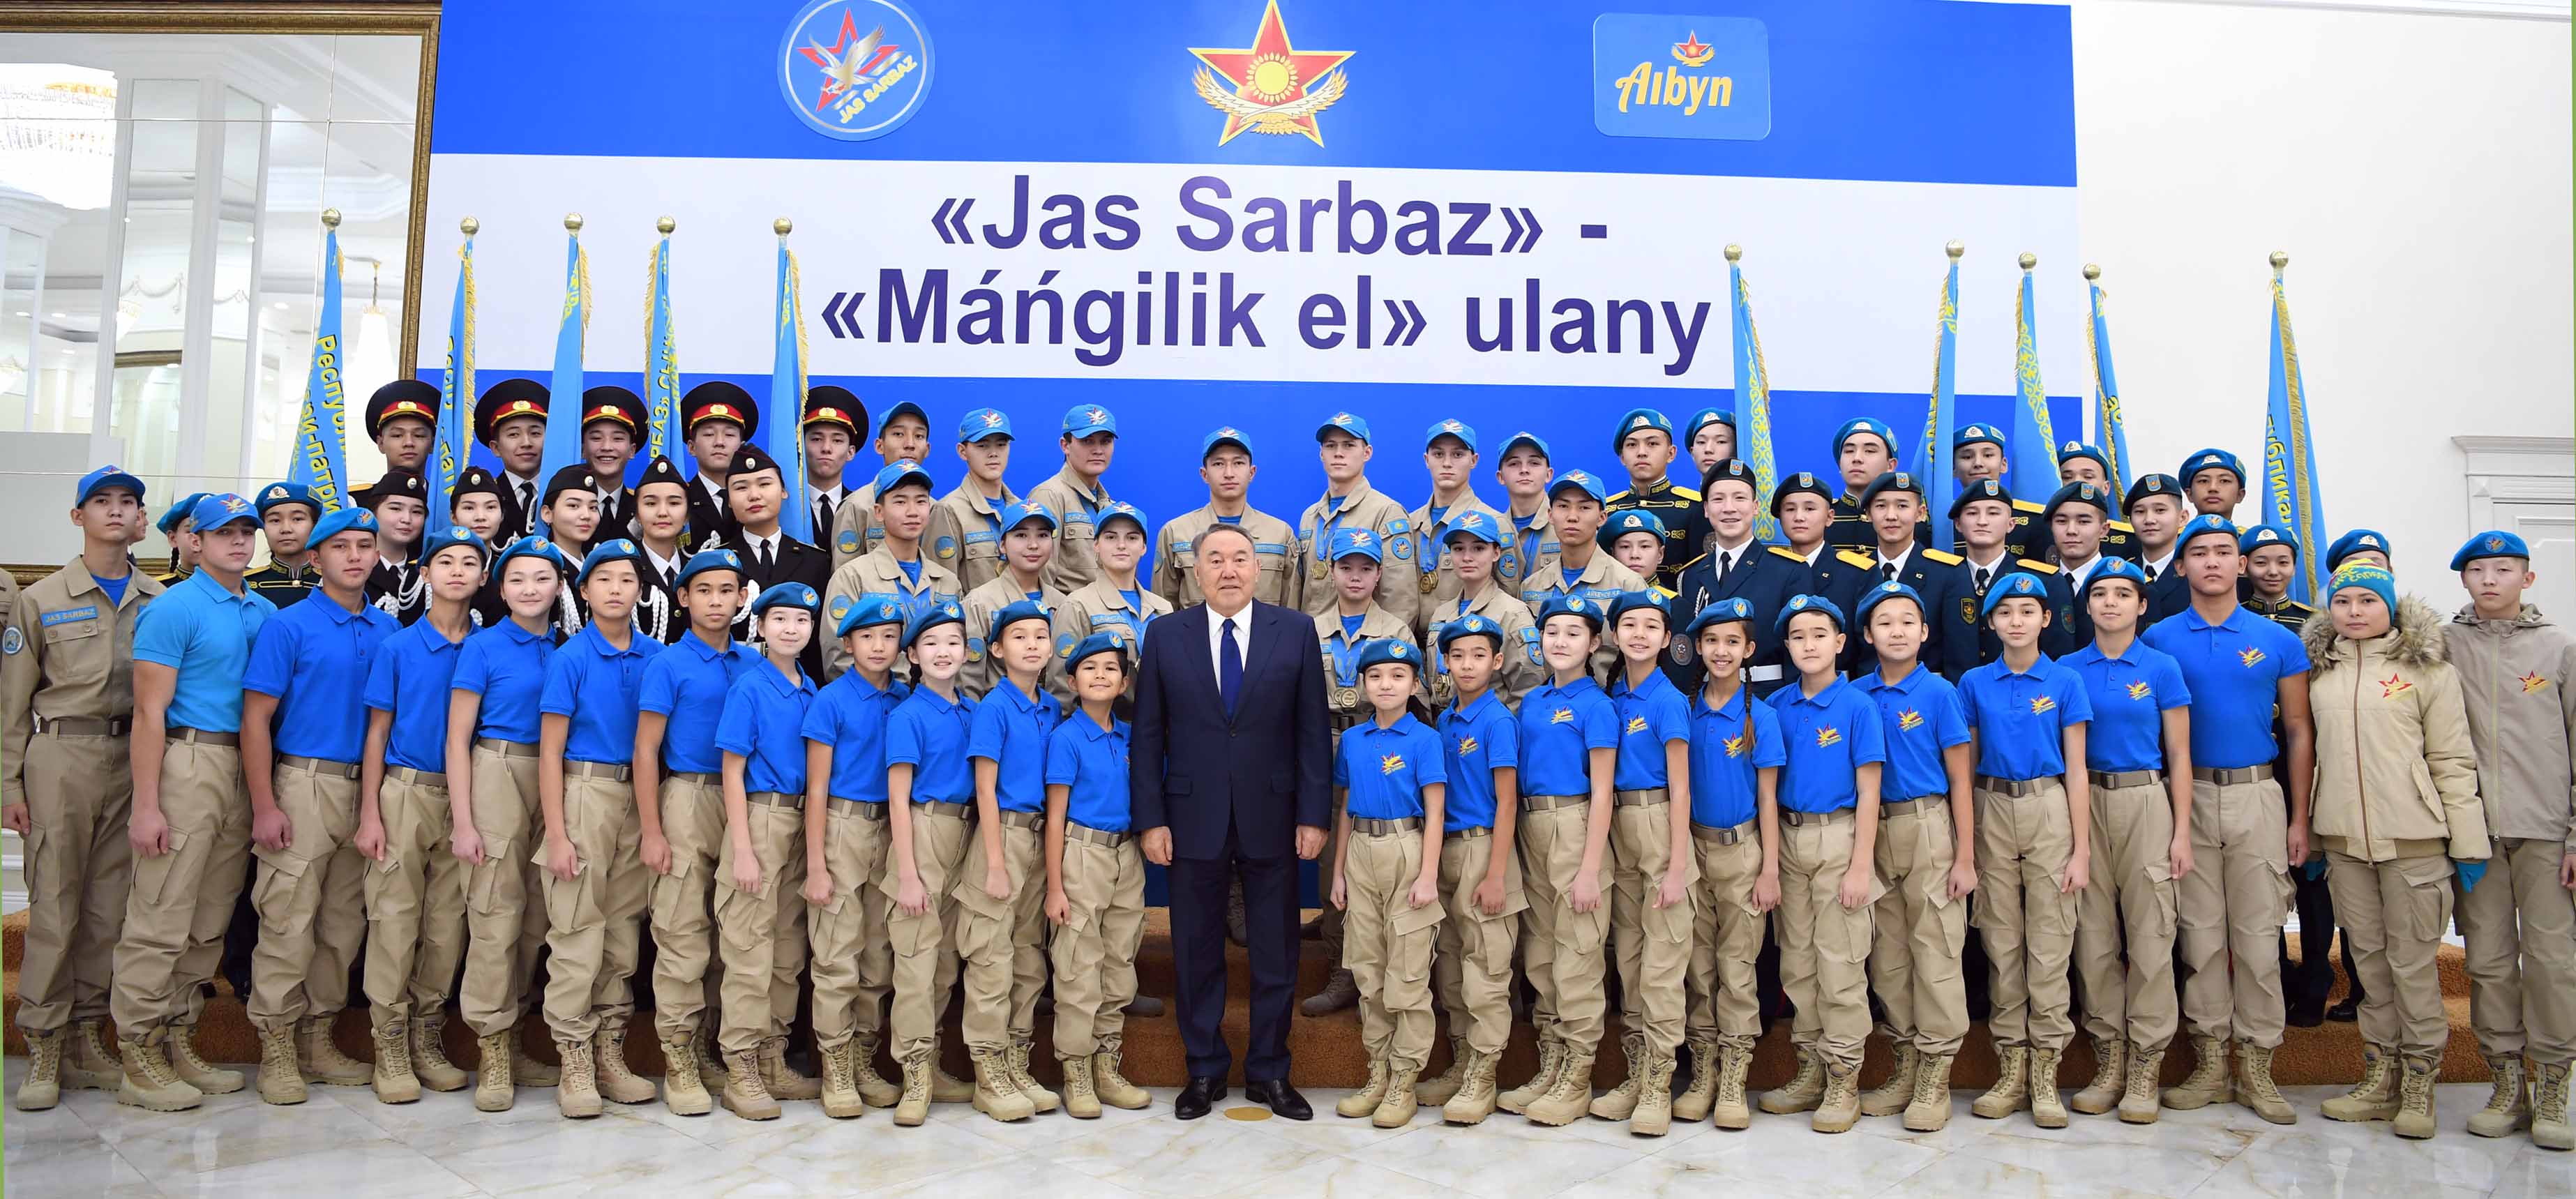 Kazakh President meets with pupils of Zhas Sarbaz, youth military patriotic movement